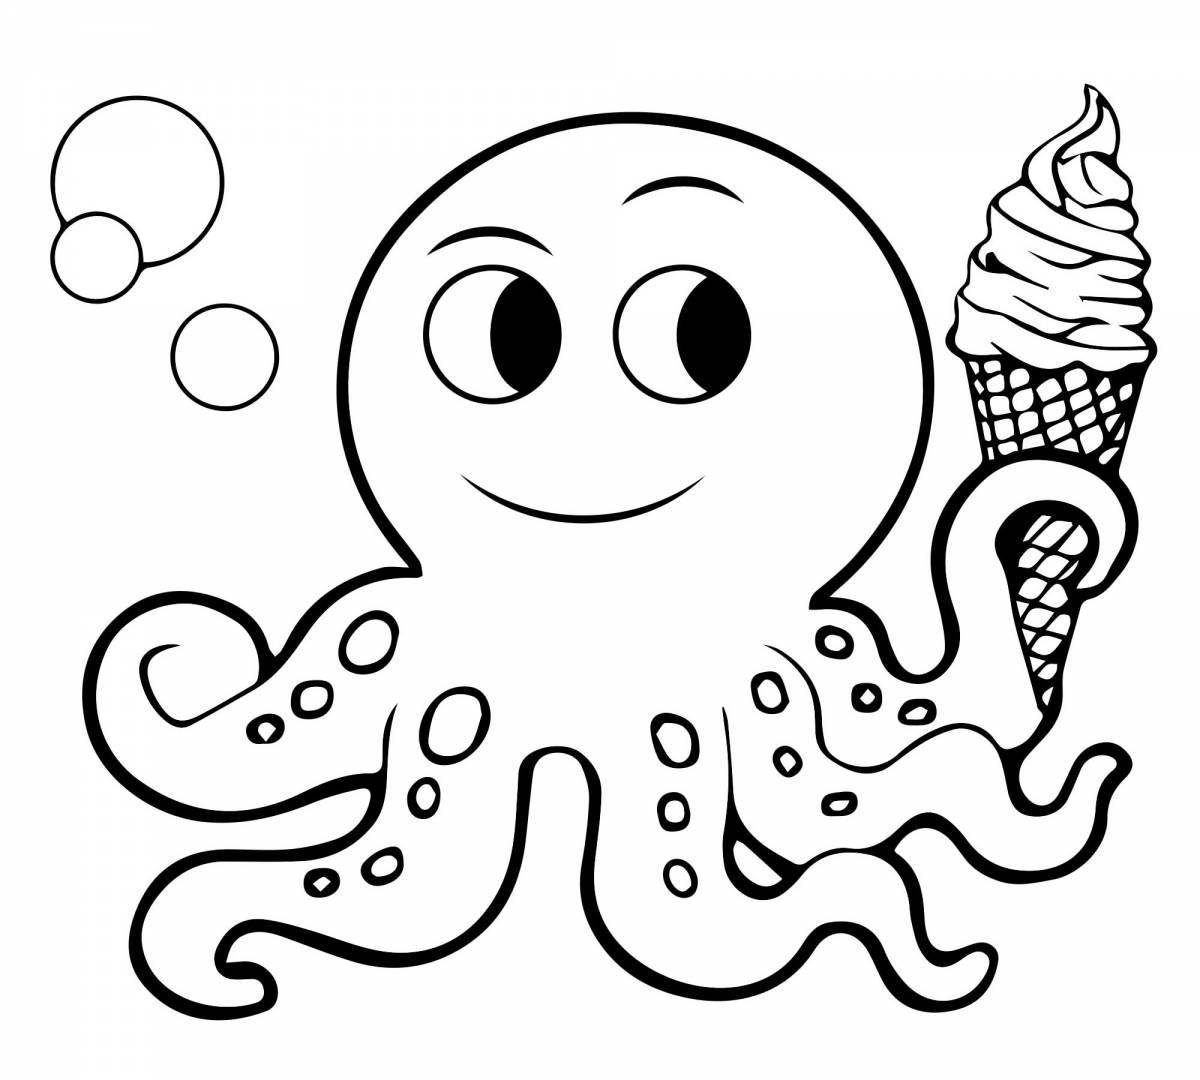 Fat octopus coloring page